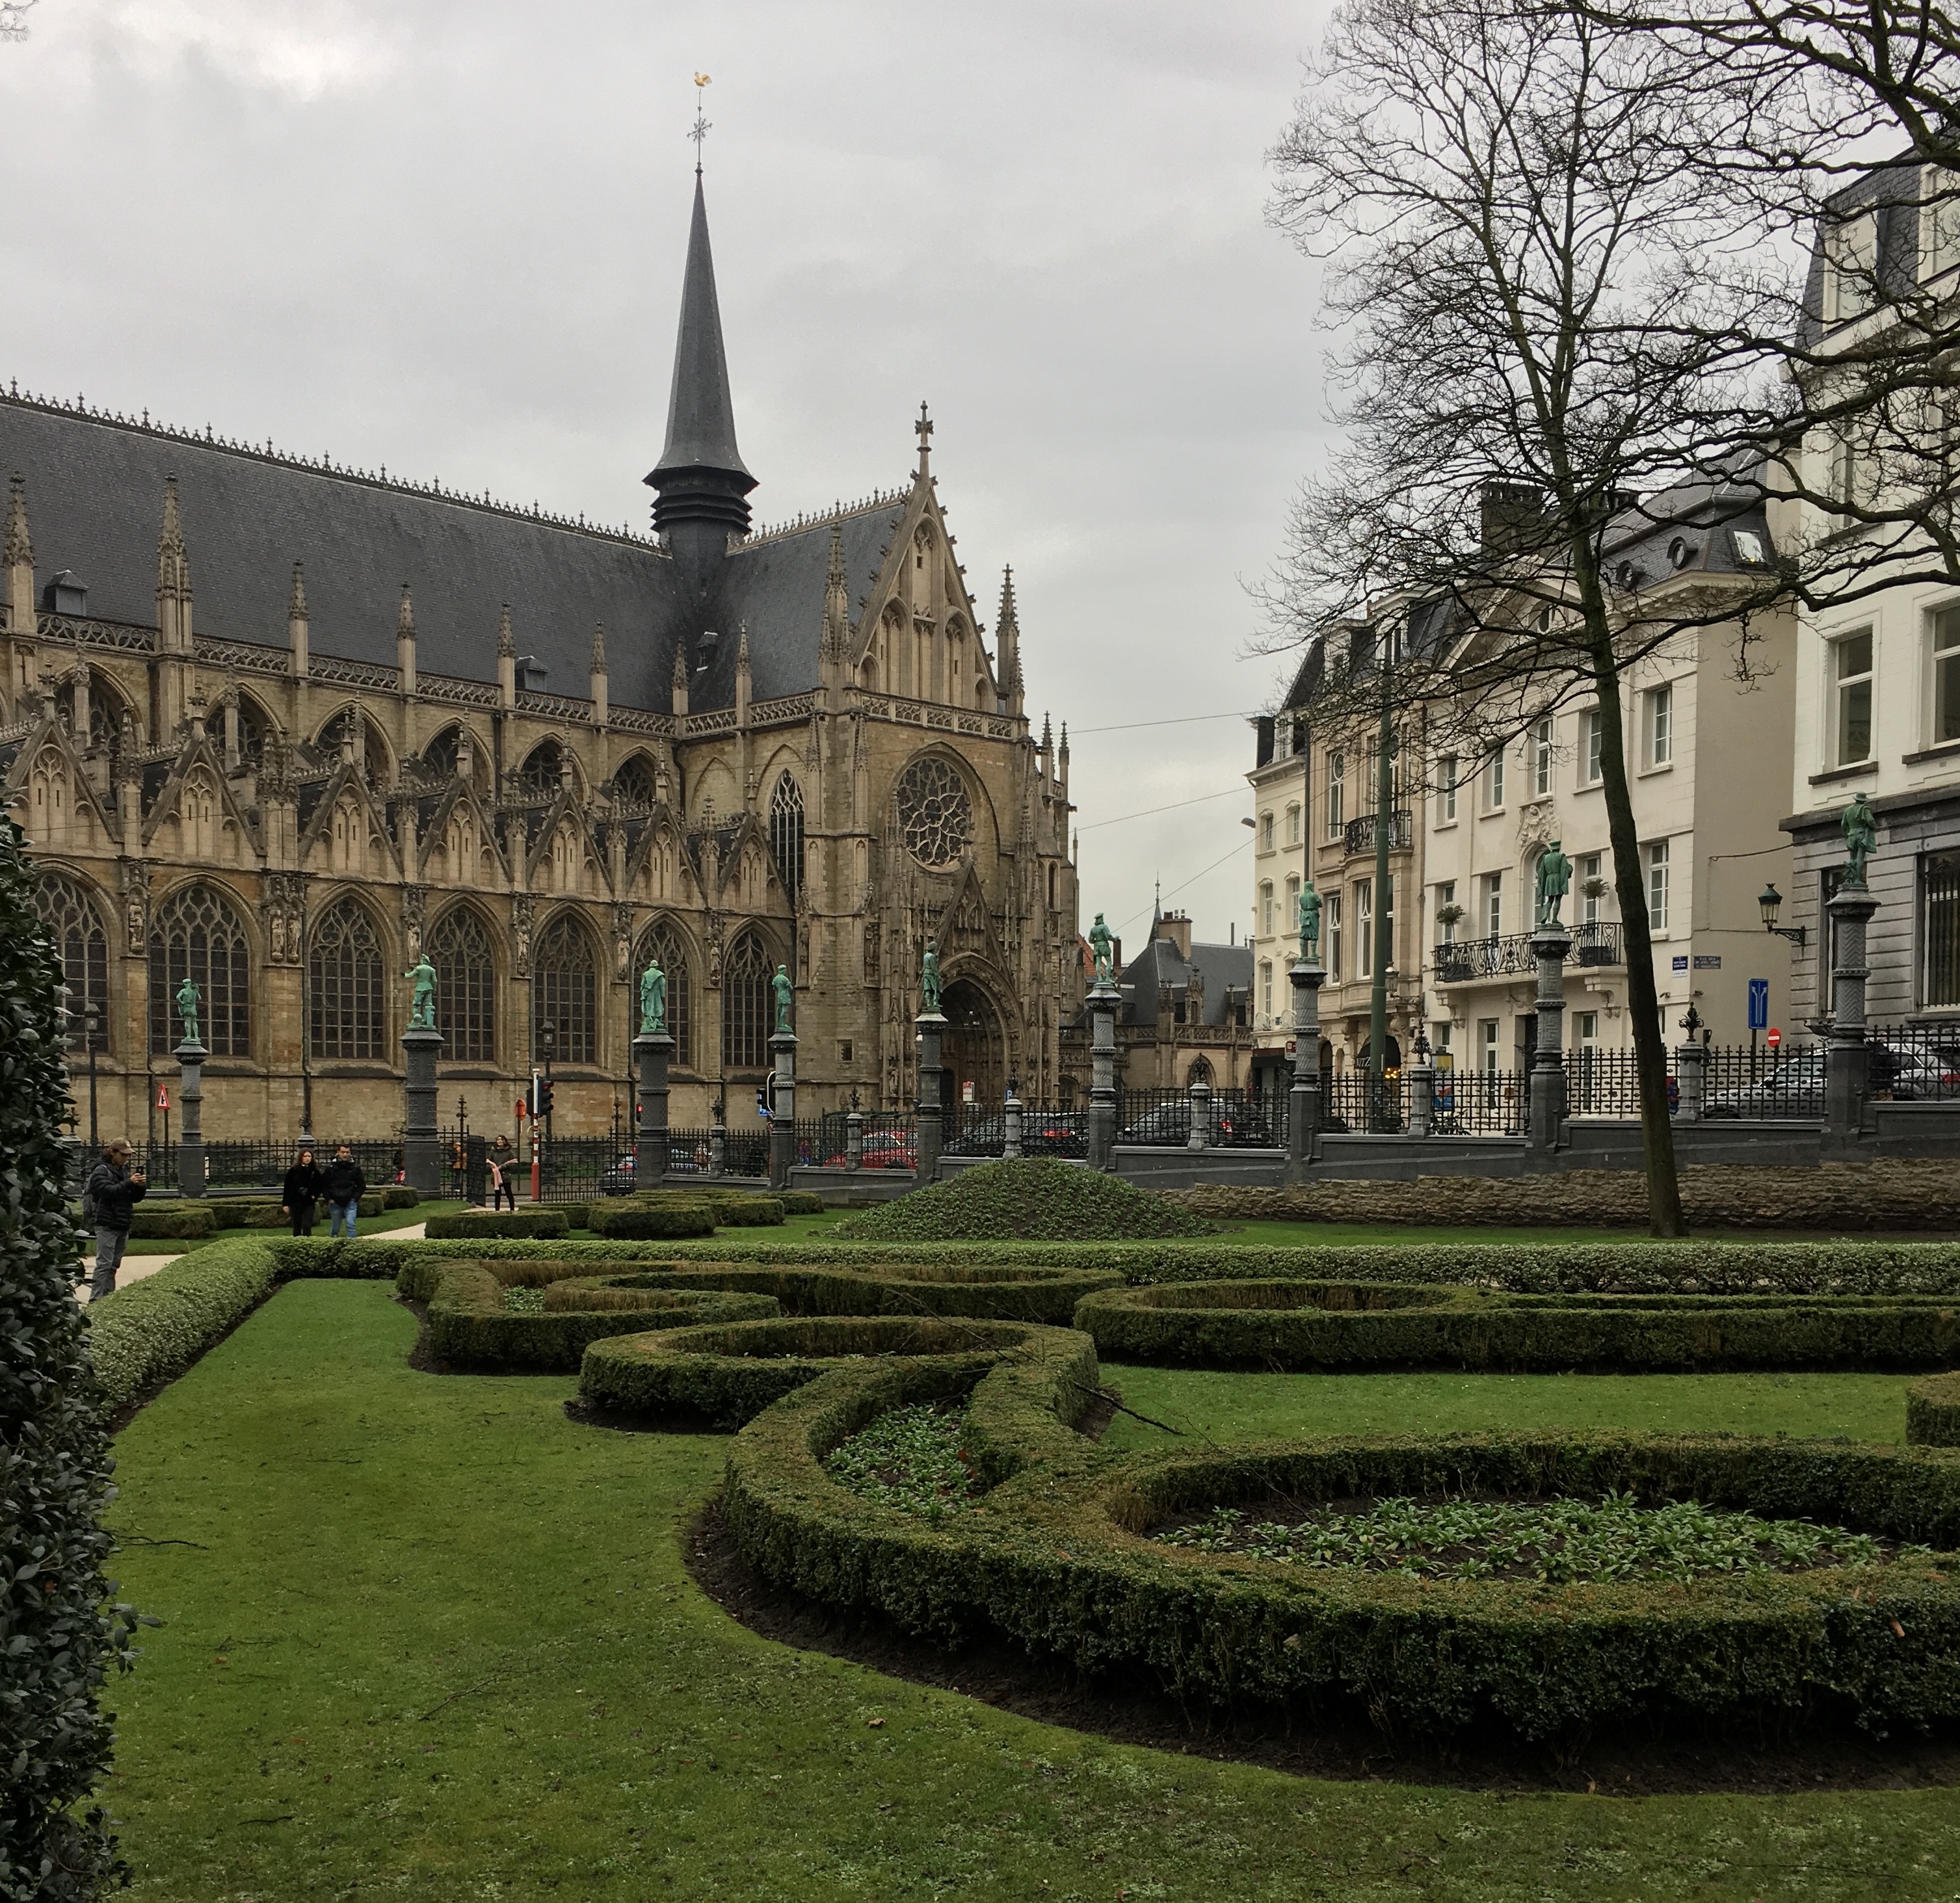 The Notre Dame Church of Sablon on a cloudy day, with a green garden in the foreground